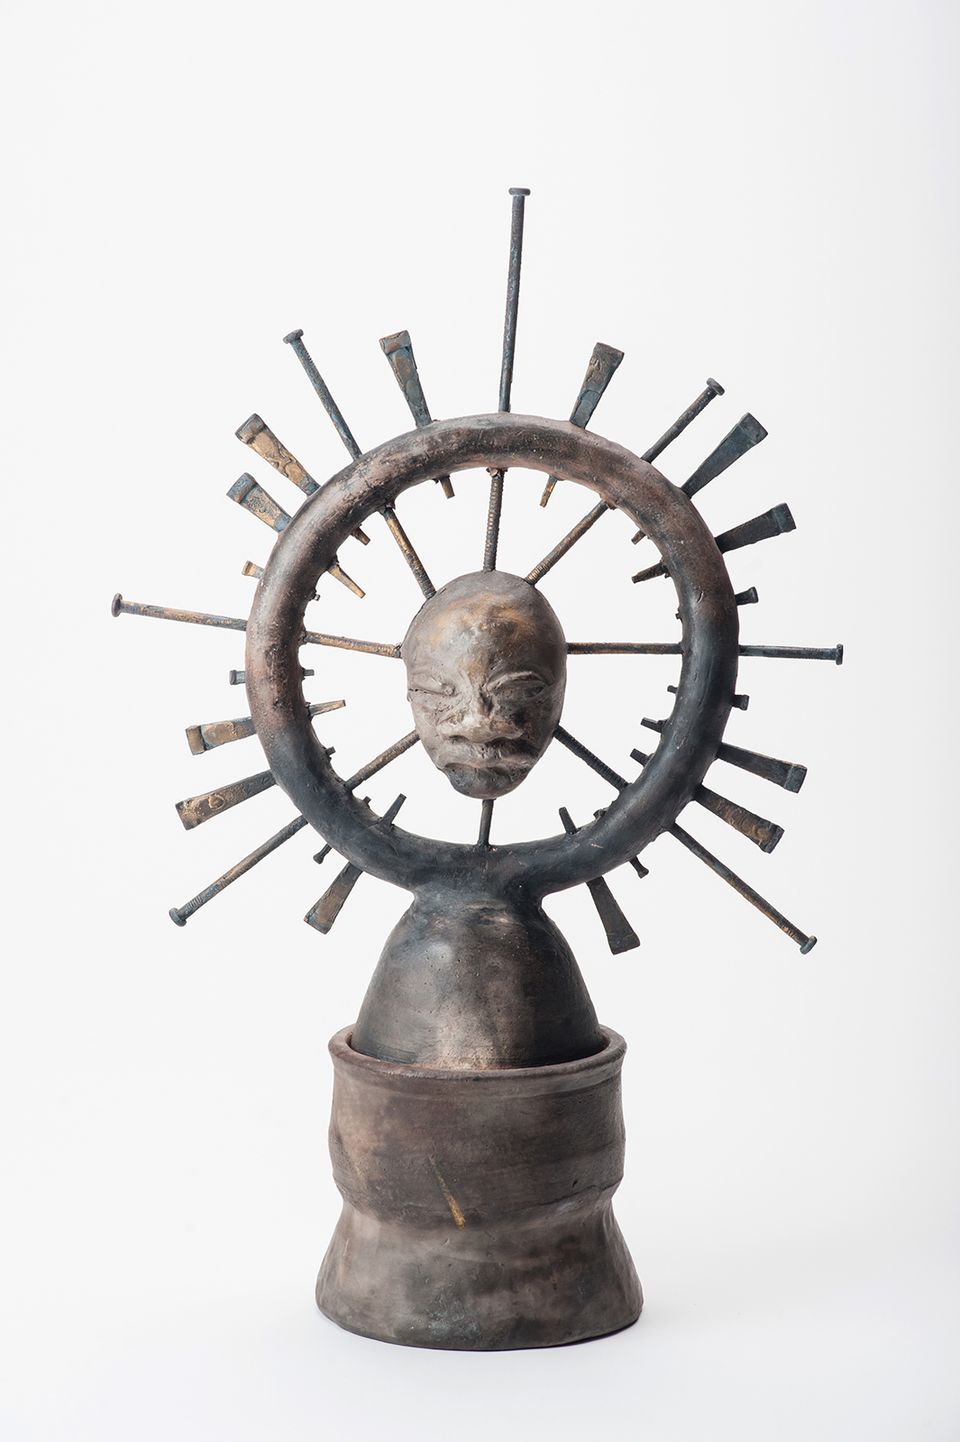 An image of a sculpture with a circle and nails piercing the top of it.